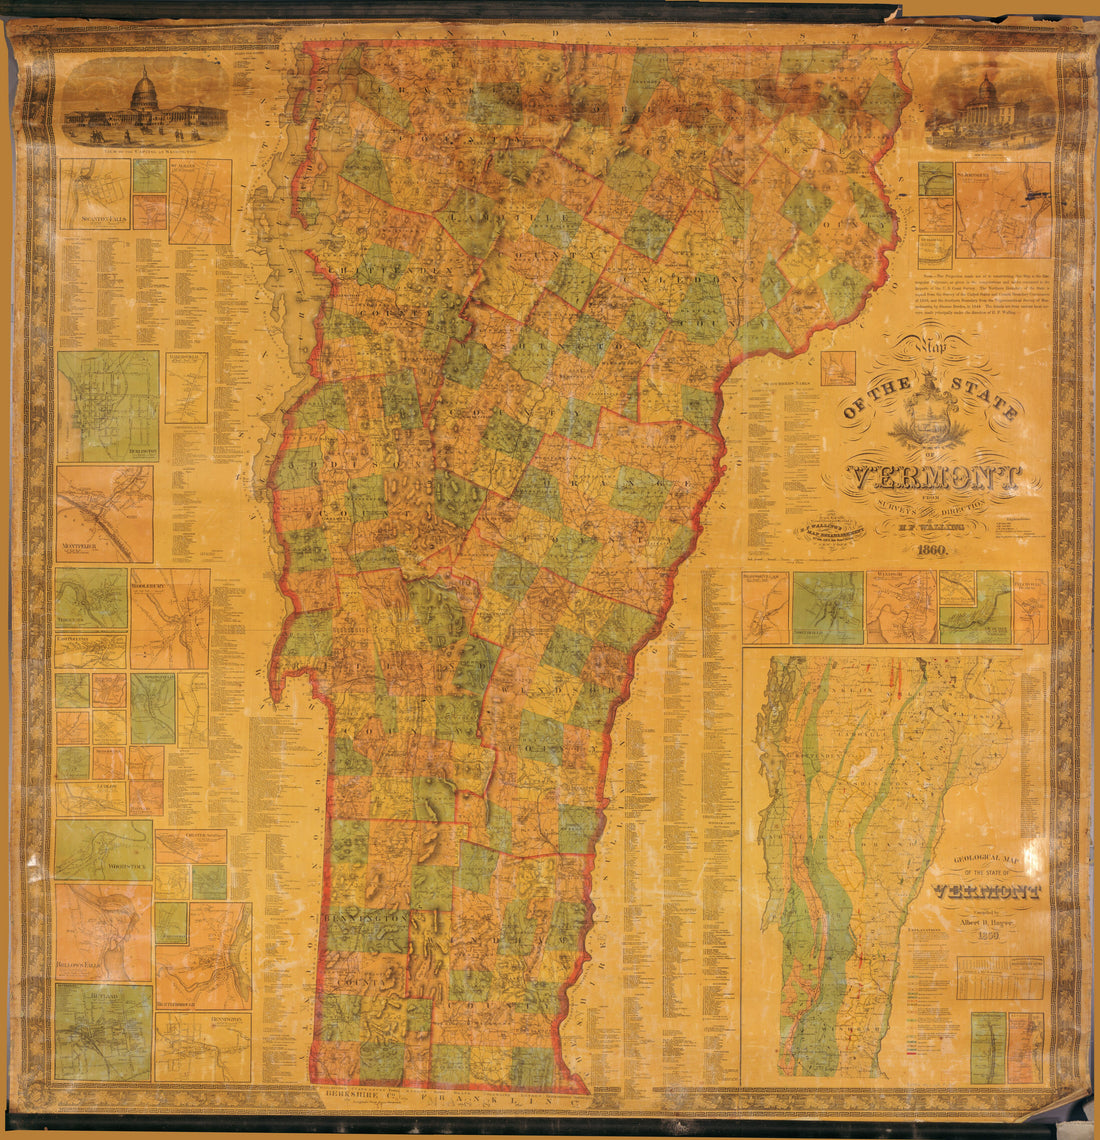 This old map of Map of the State of Vermont from 1860 was created by  H.F. Walling&